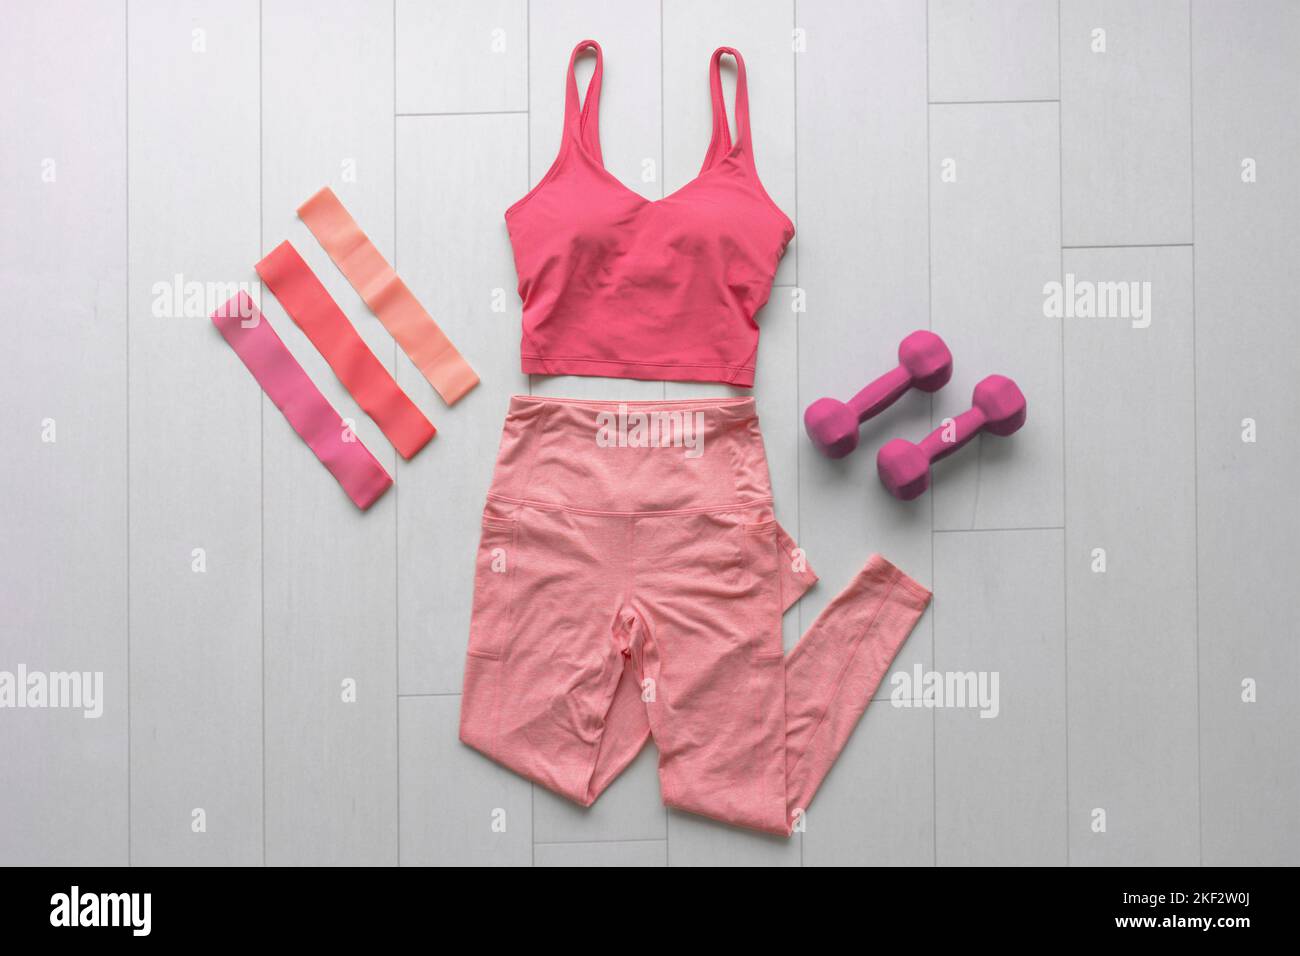 Fitness clothes flat lay workout at home with resistance bands and dumbbell weights. Pink athleisure fashion clothing top view on white wood floor Stock Photo